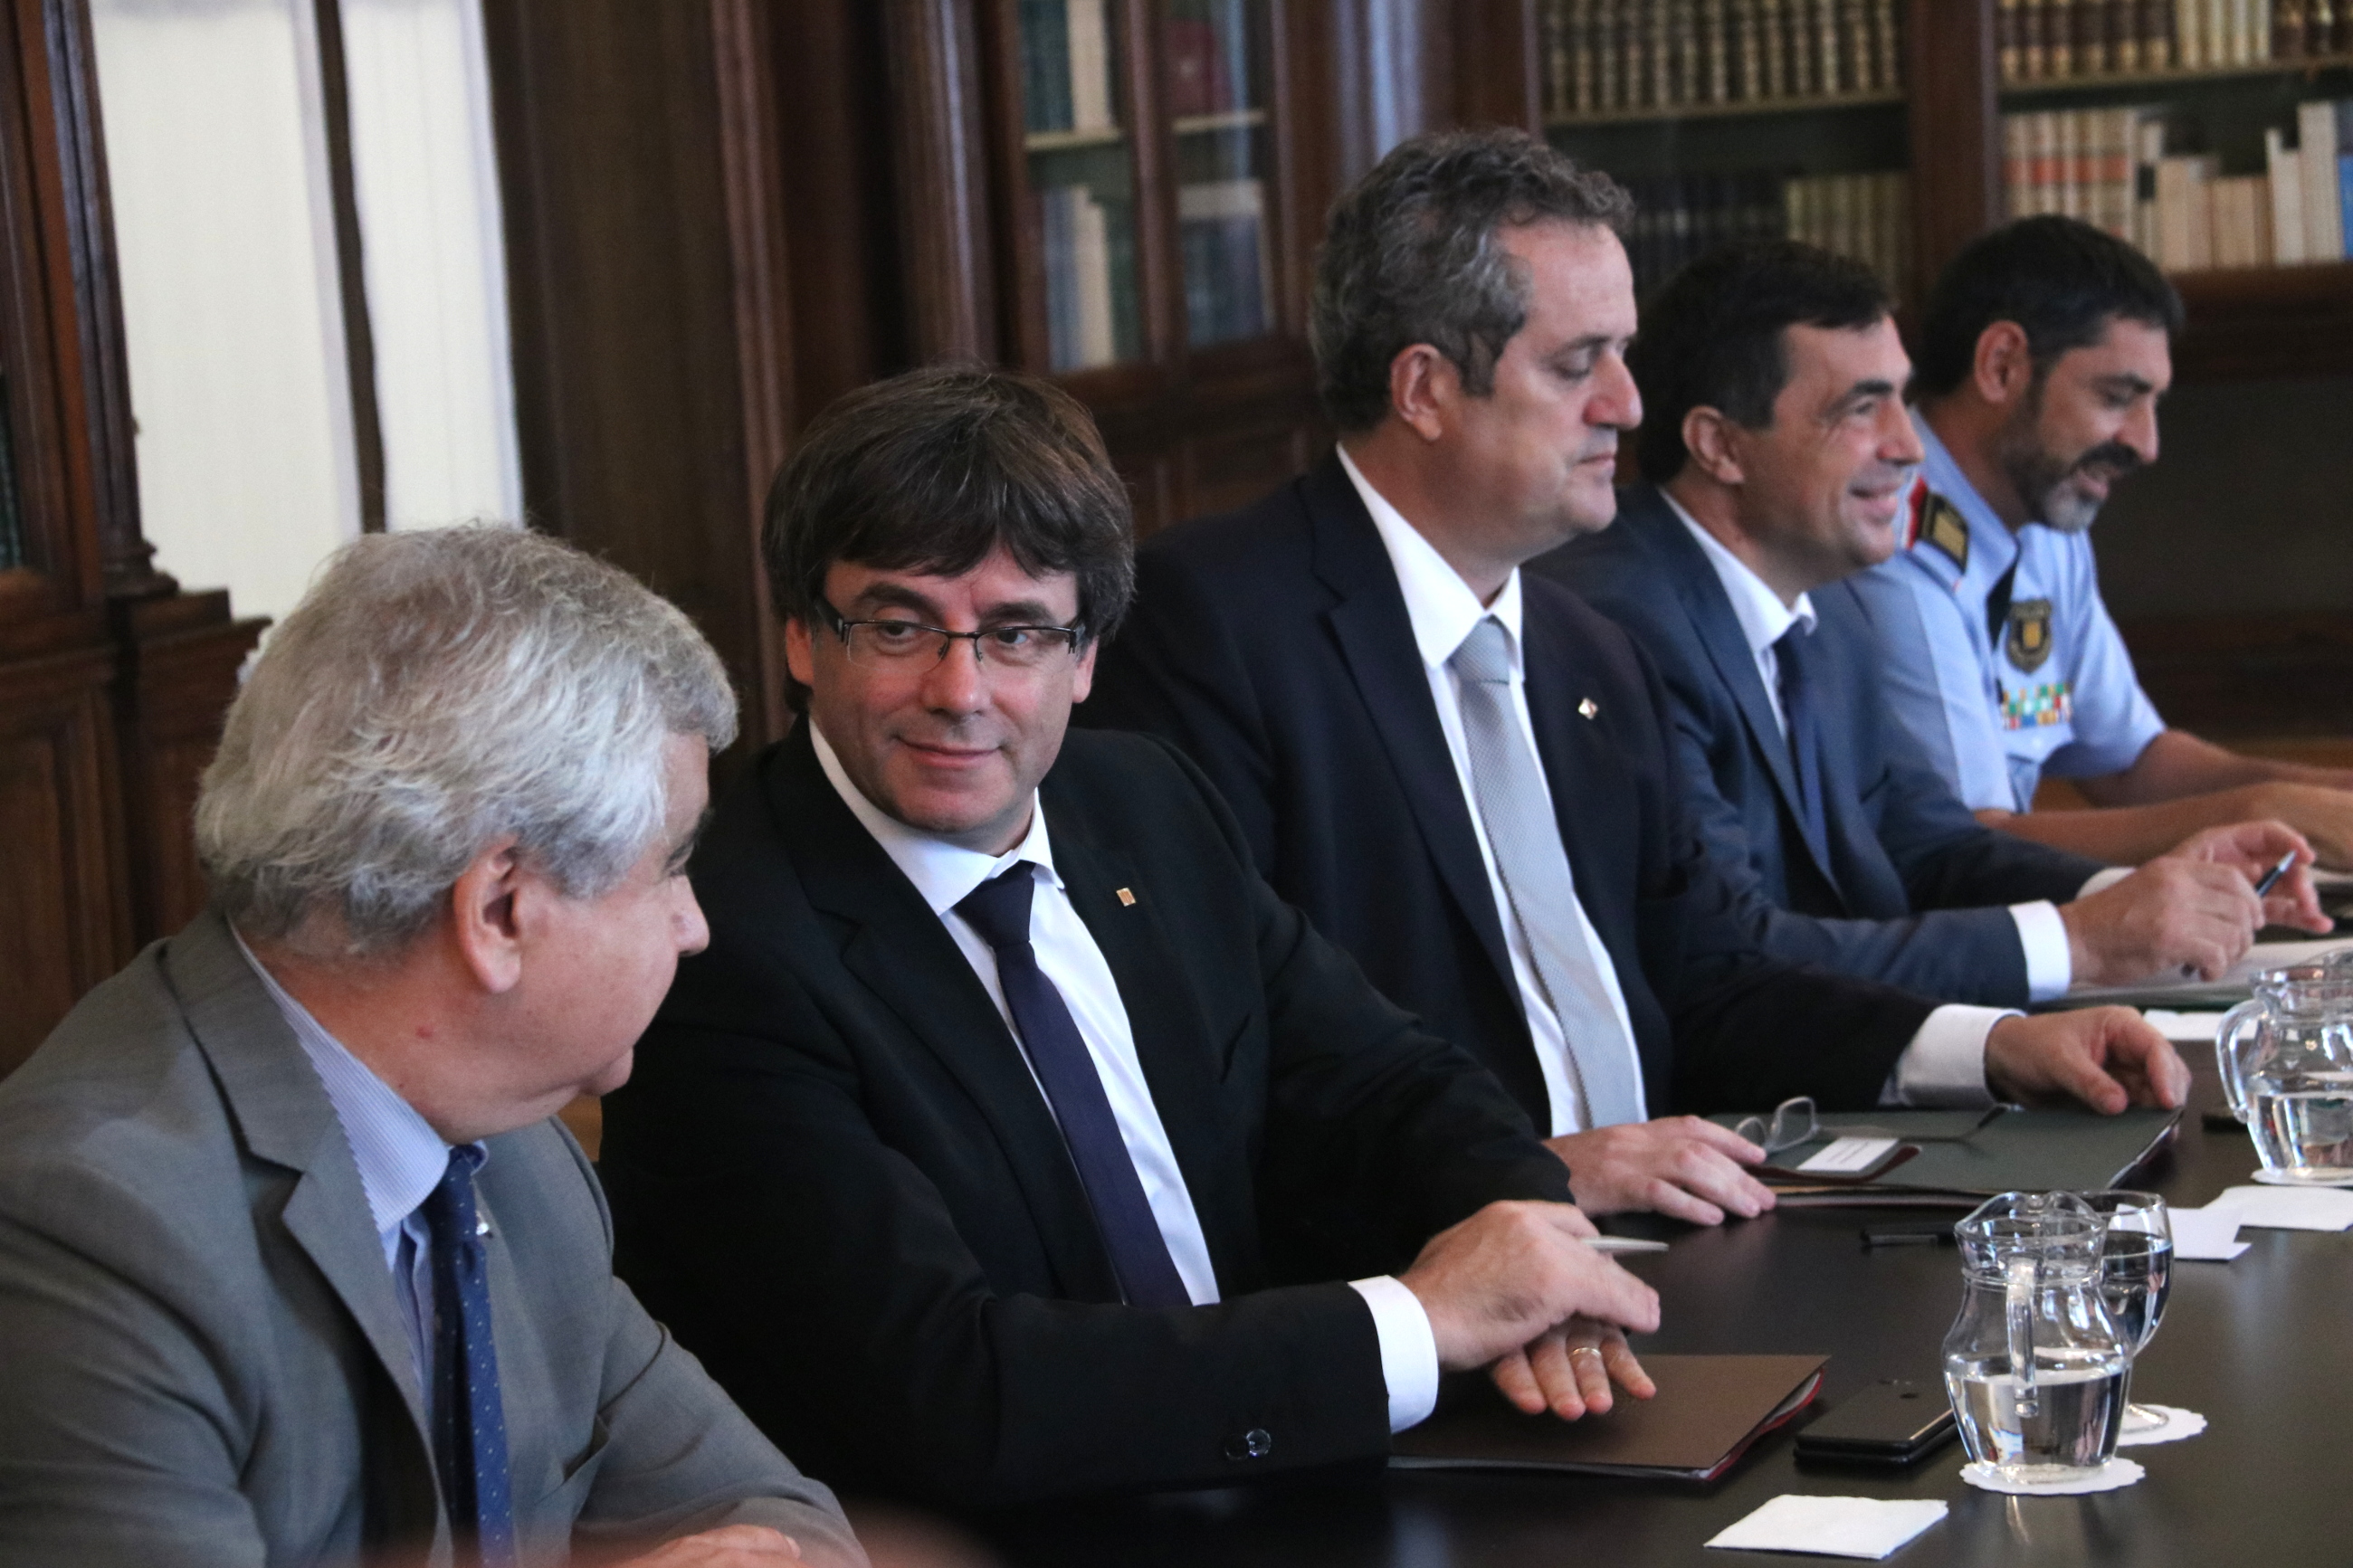 Image of the Catalonia-Spain security meeting